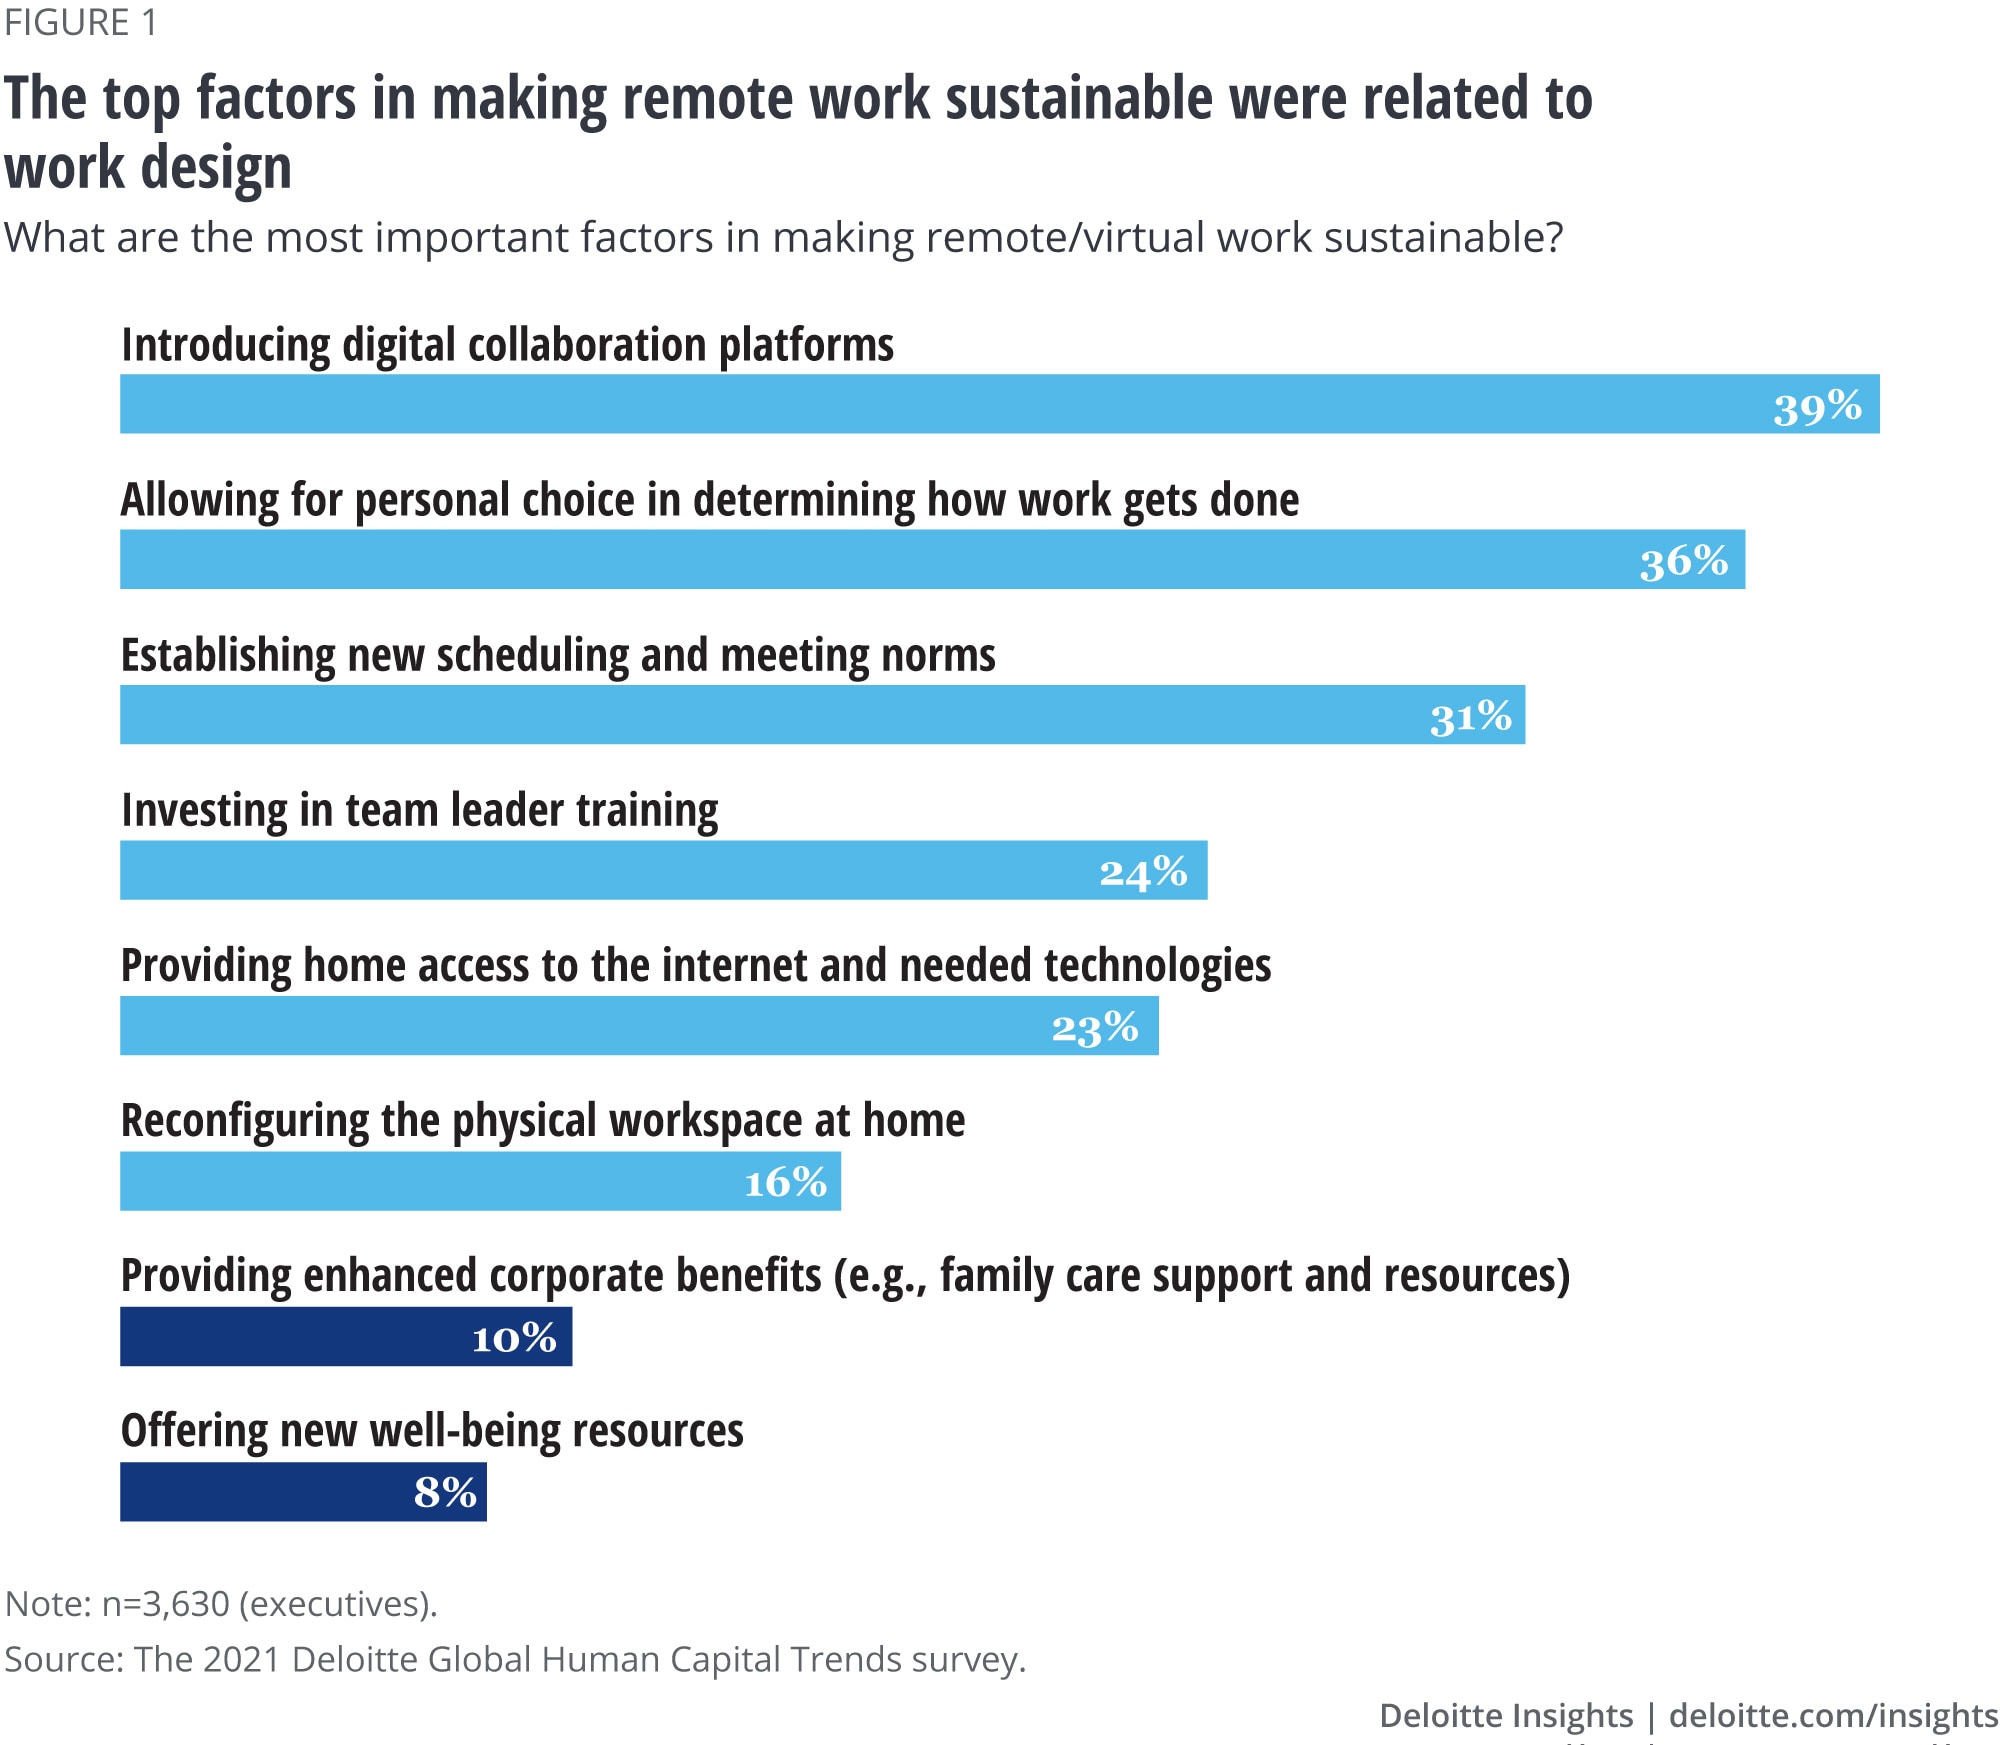 The top factors in making remote work sustainable were related to work design